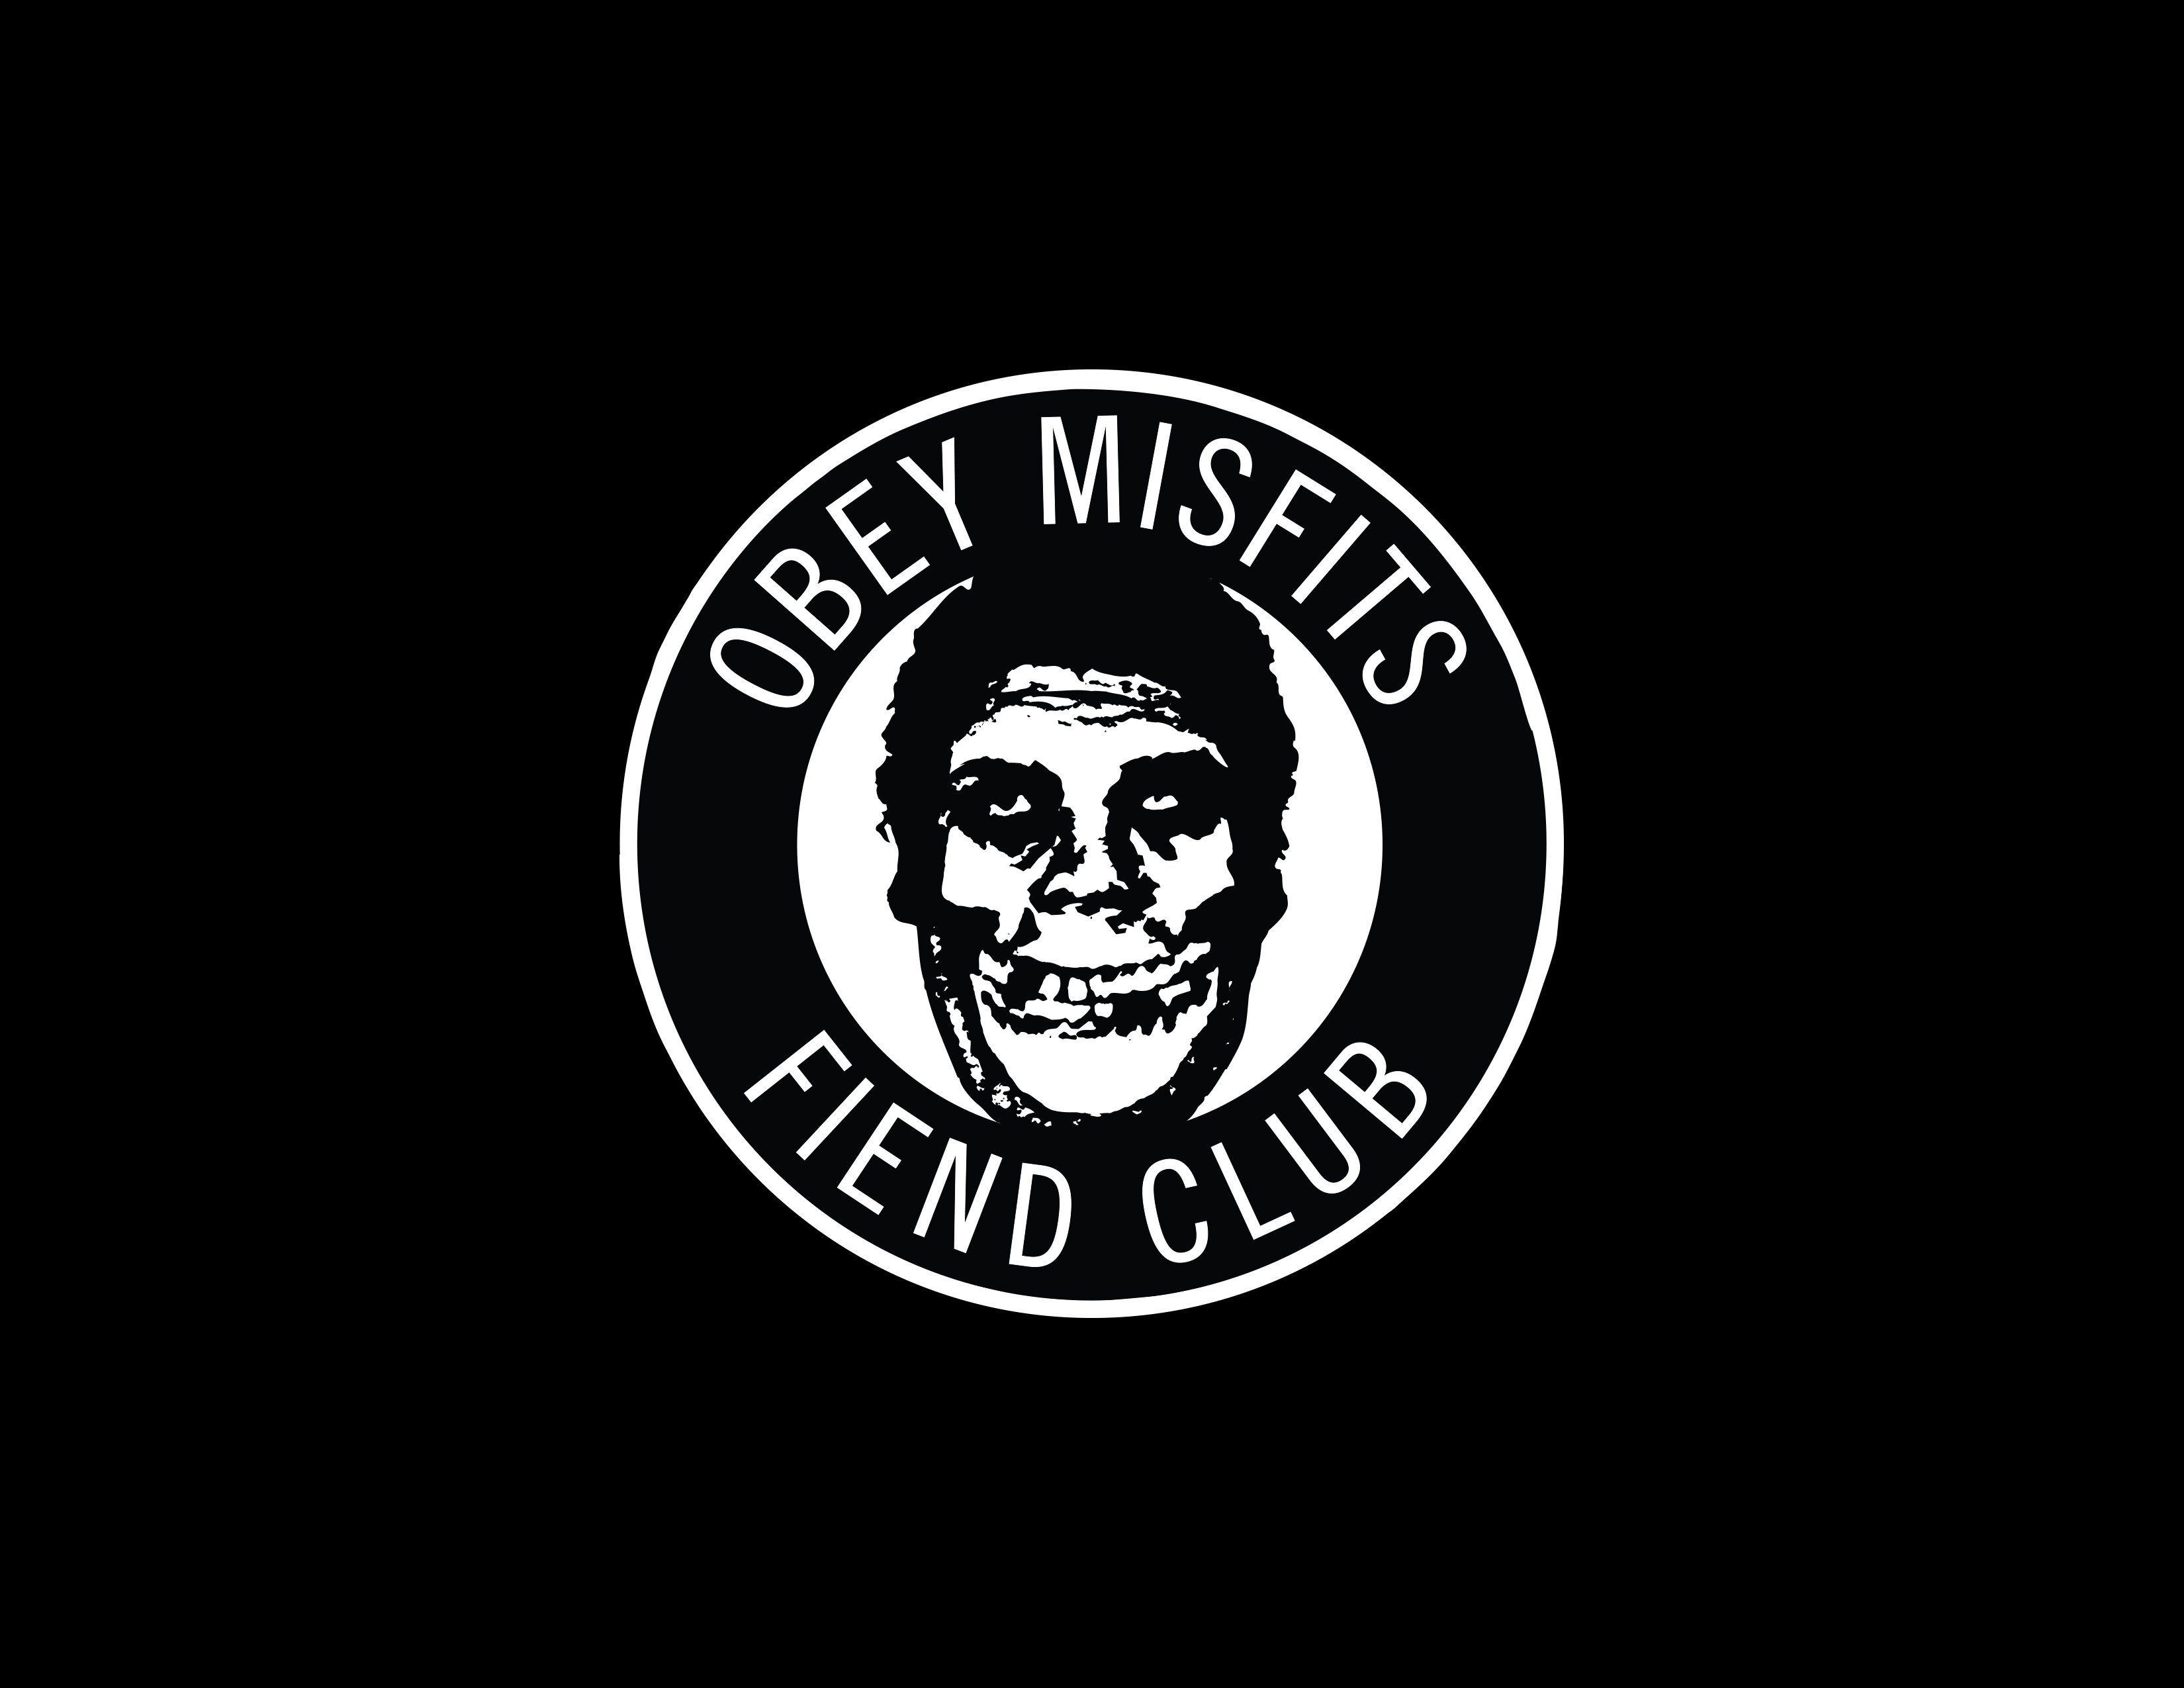 Obey Brand Logo - OBEY MISFITS Clothing Collection | OBEY Clothing & Apparel